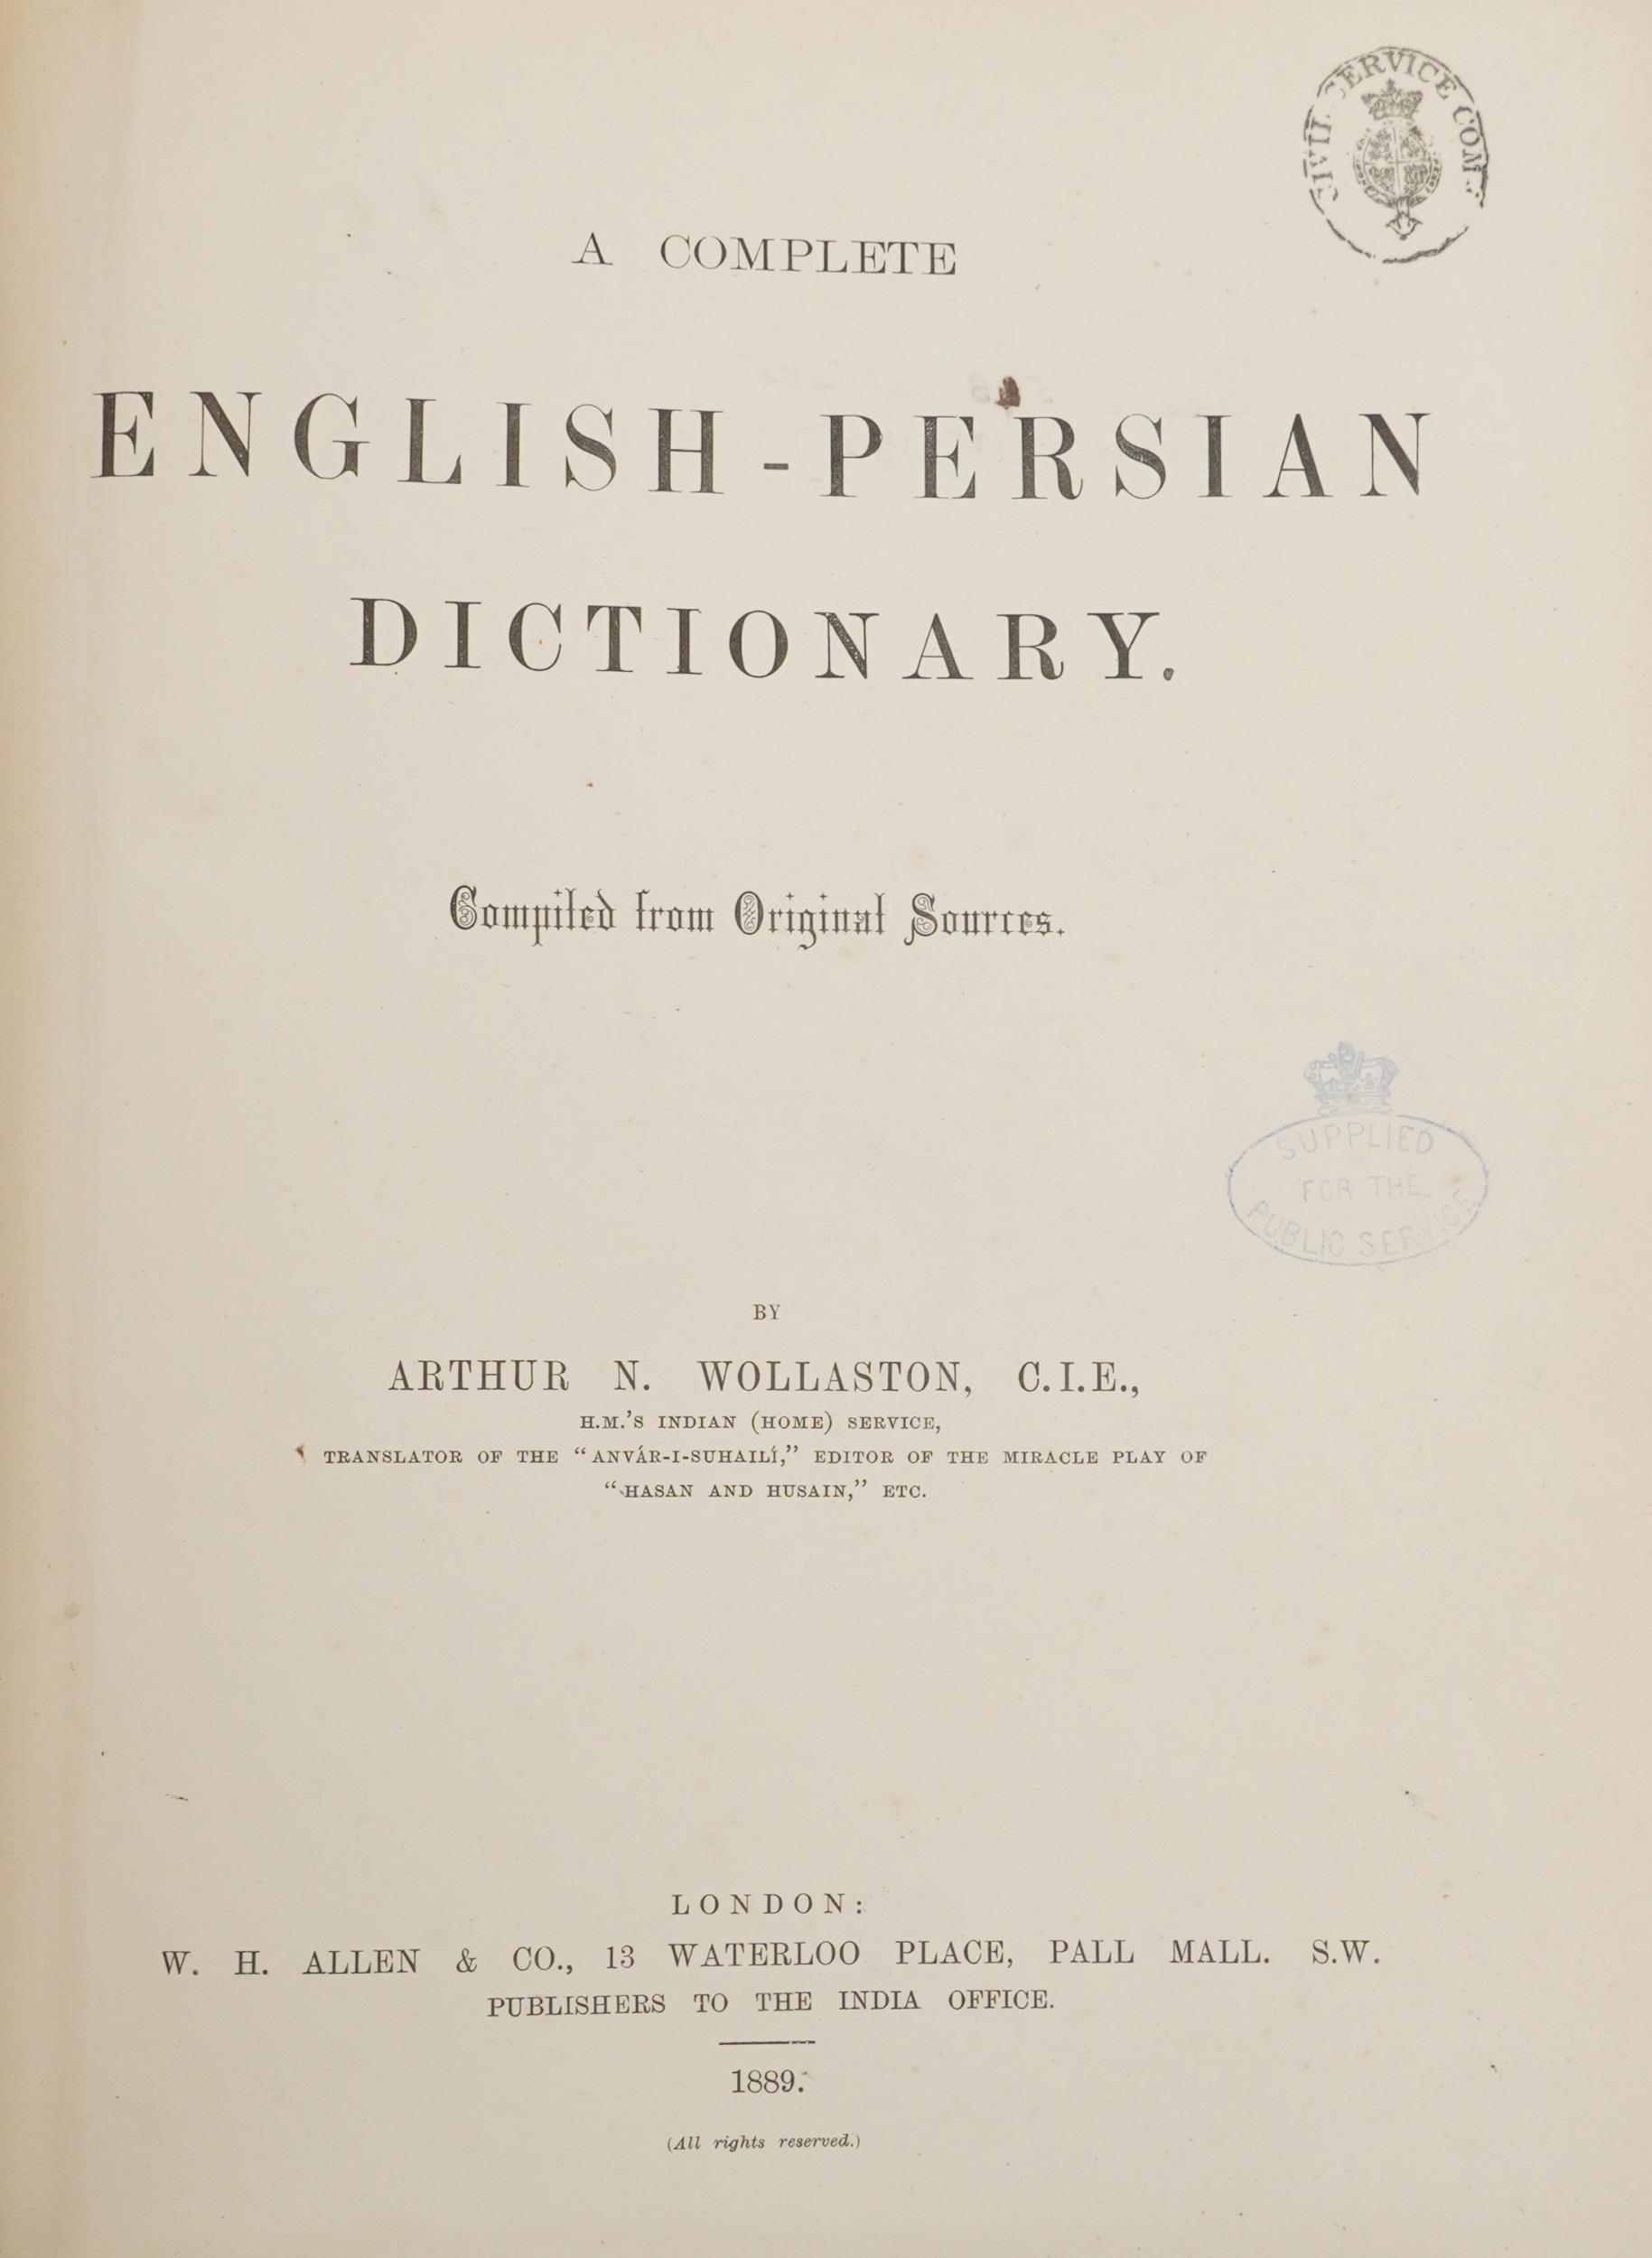 English-Persian Dictionary, 19th century hardback book by Arthur N Woolaston, published London W H - Image 4 of 5